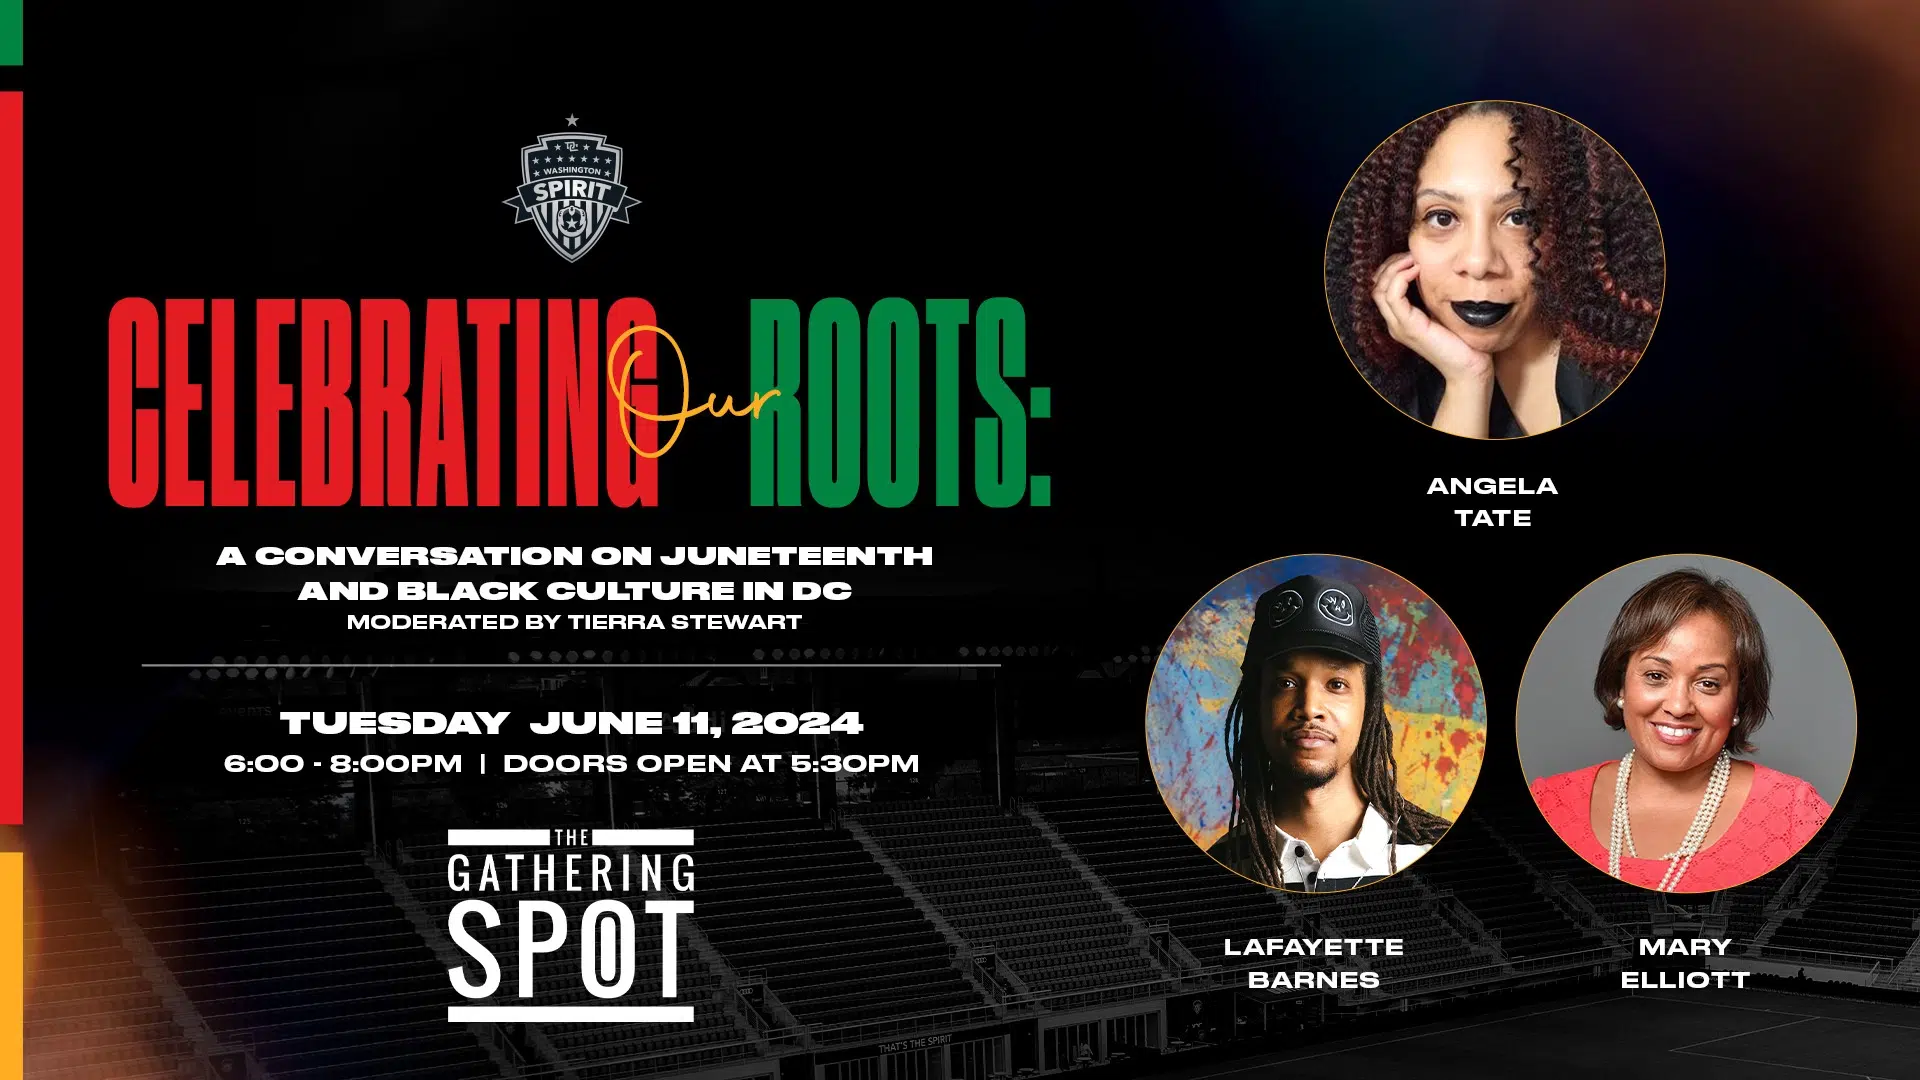 Celebrating Our Roots: A Conversation on Juneteenth and Black Culture in DC Featured Image